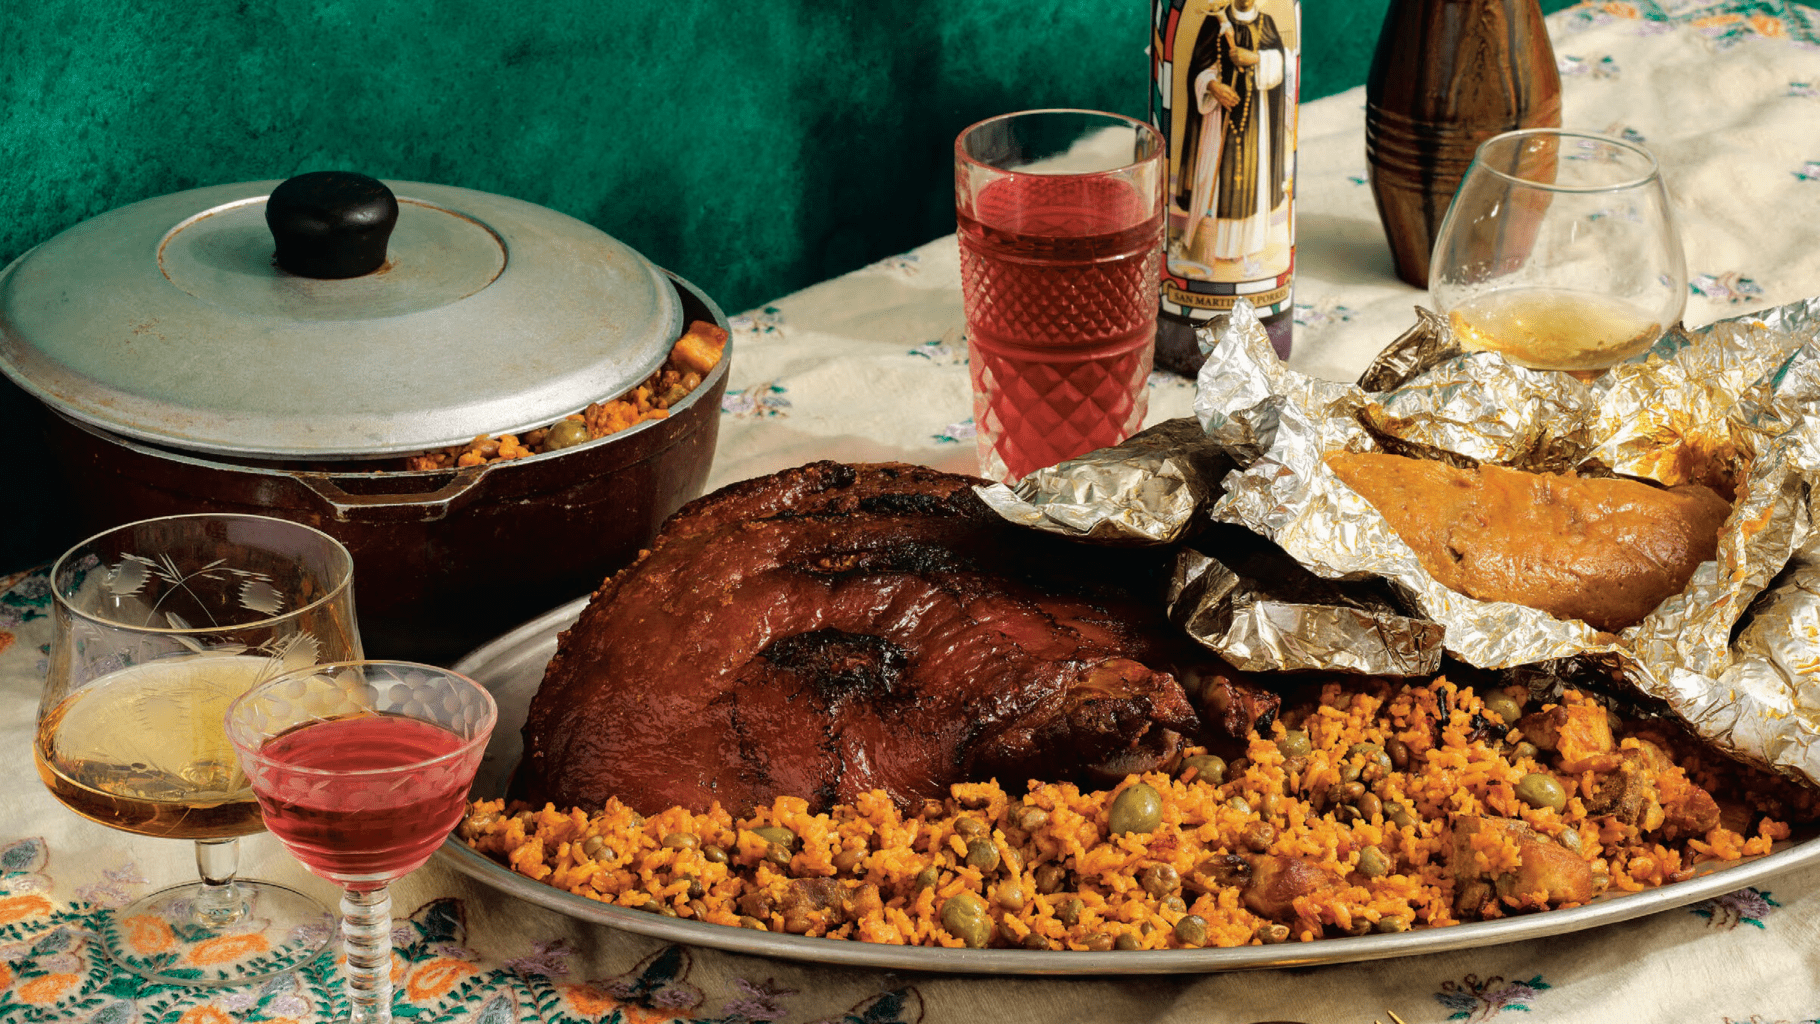 Pernil excerpted from Diasporican: A Puerto Rican Cookbook by Illyanna Maisonet.